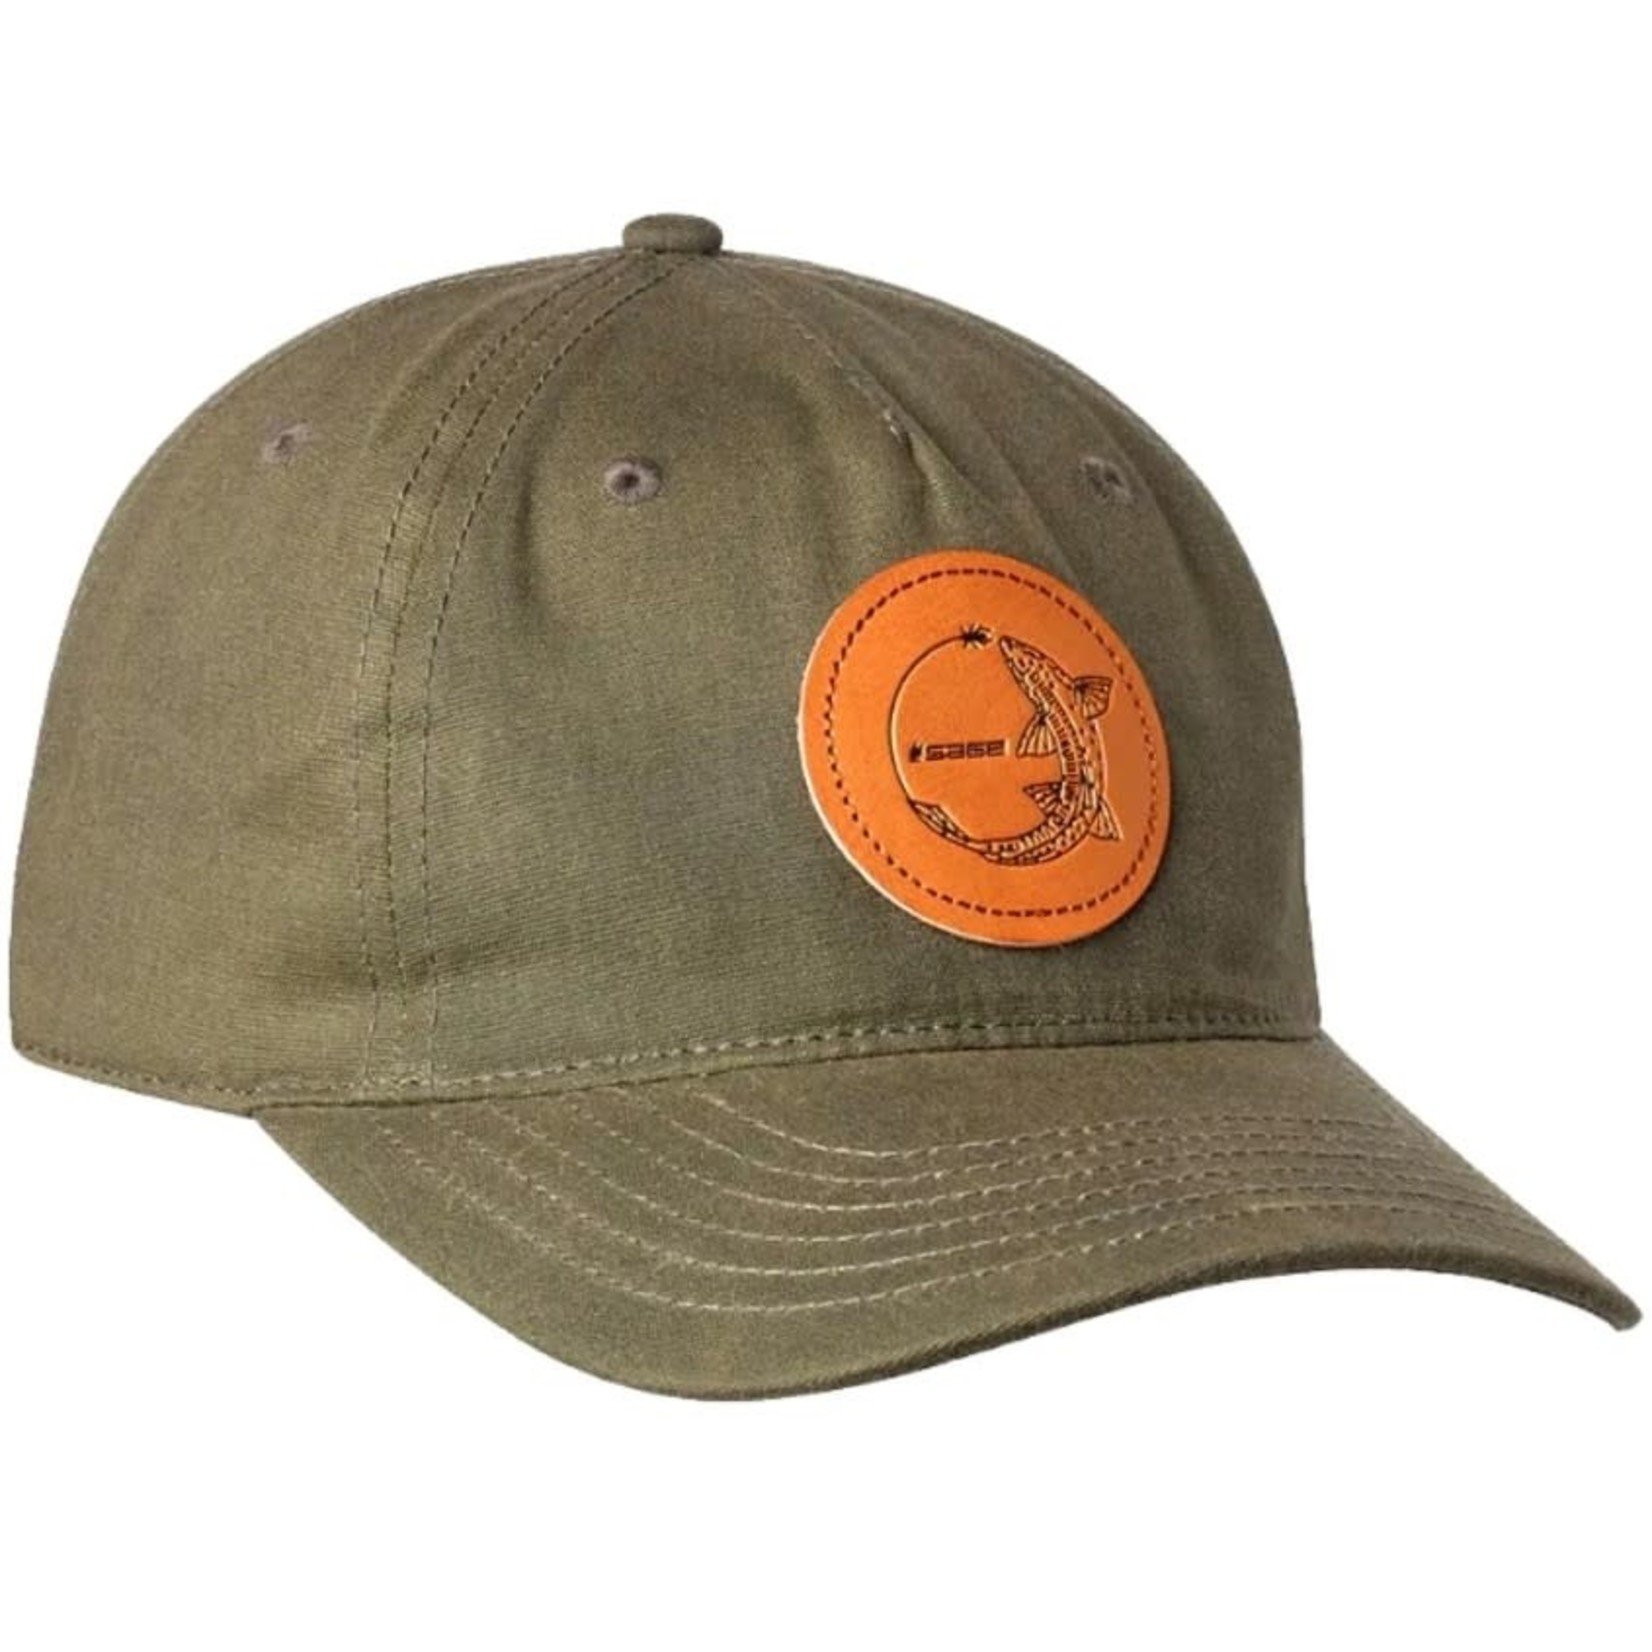 SAGE Chasing Trout Hat - Olive One Size